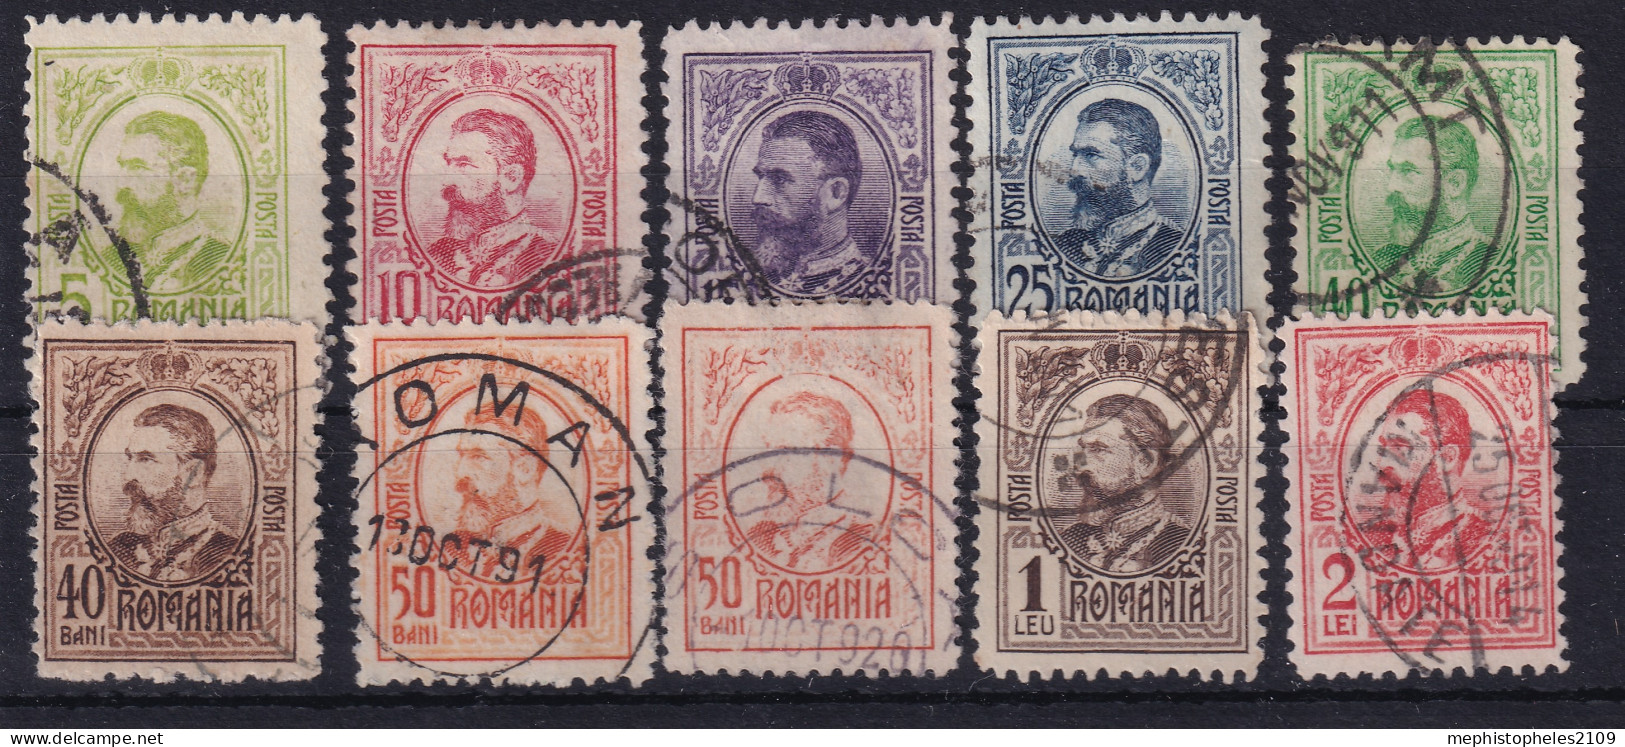 ROMANIA 1908-18 - Canceled - Sc# 207-216 - Complete Set!  - Used Stamps